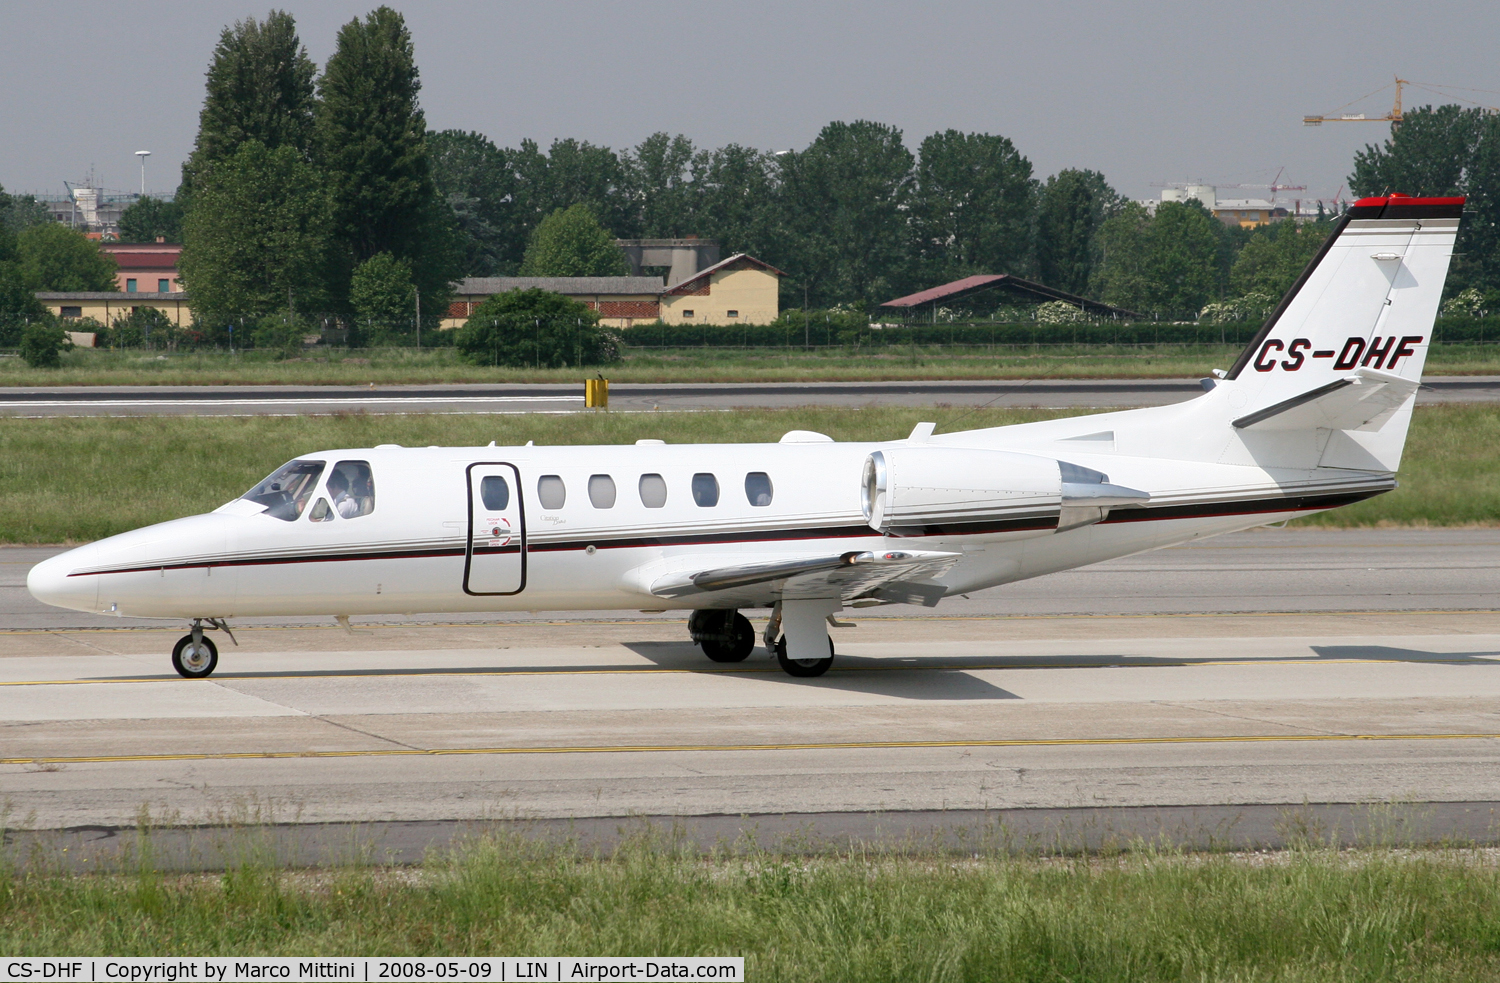 CS-DHF, 2002 Cessna 550 Citation C/N 550-1025, Operated by NETJETS EUROPE